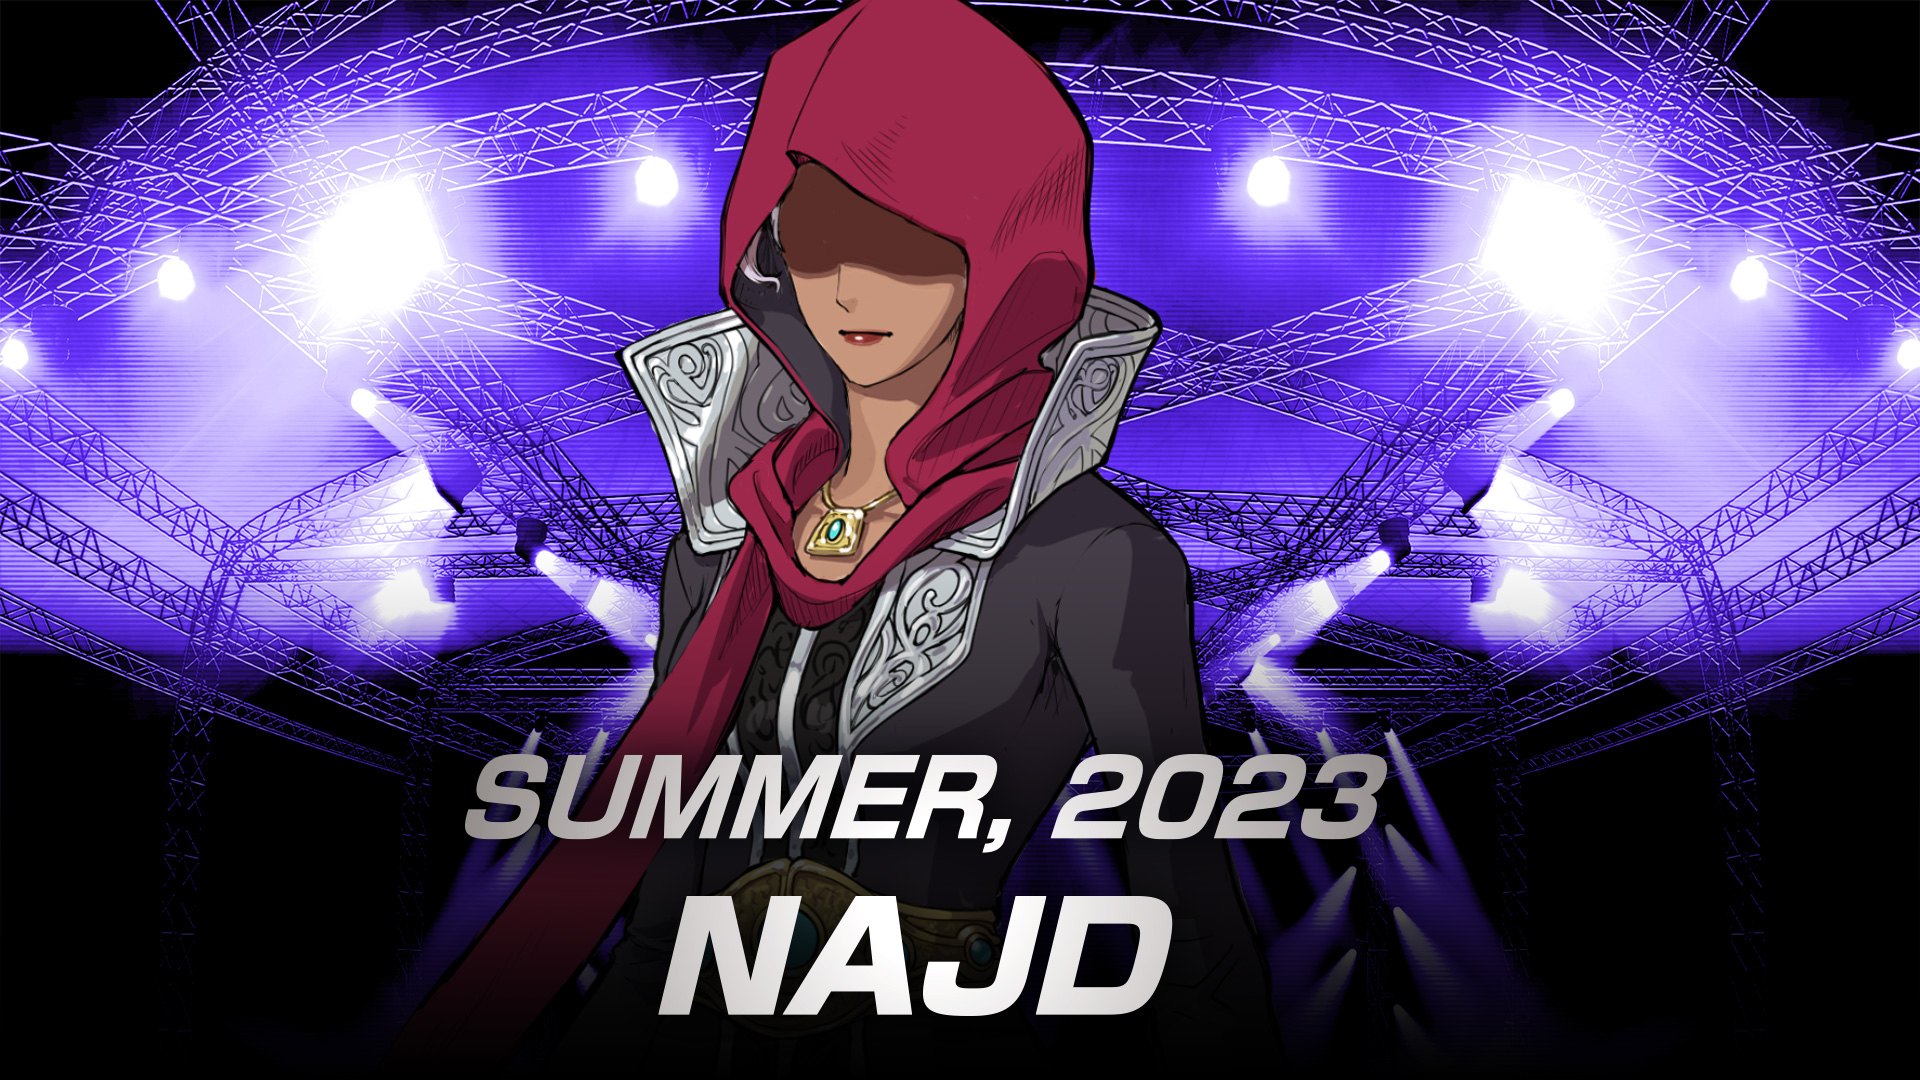 The King of Fighters 15 developers released a trailer with a new DLC character - Najd